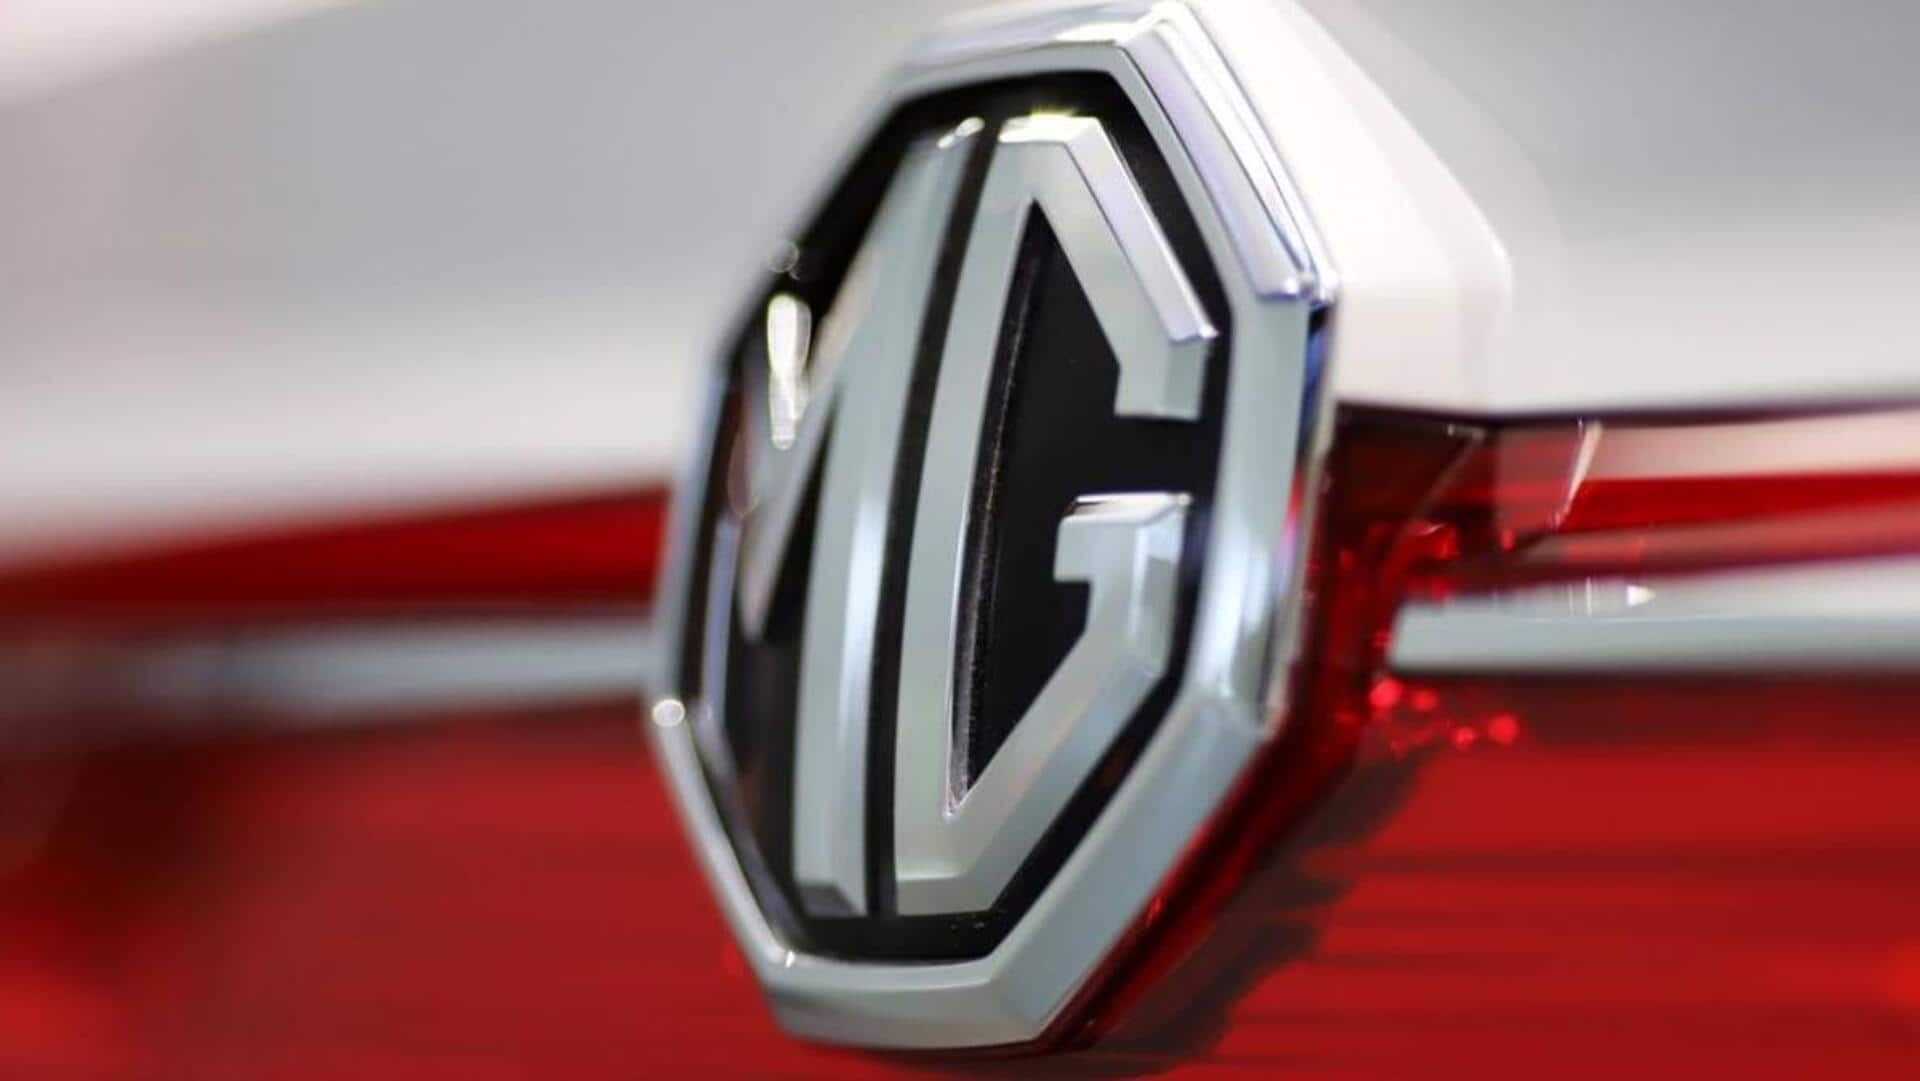 MG cars to become costlier by Rs. 50,000 this January